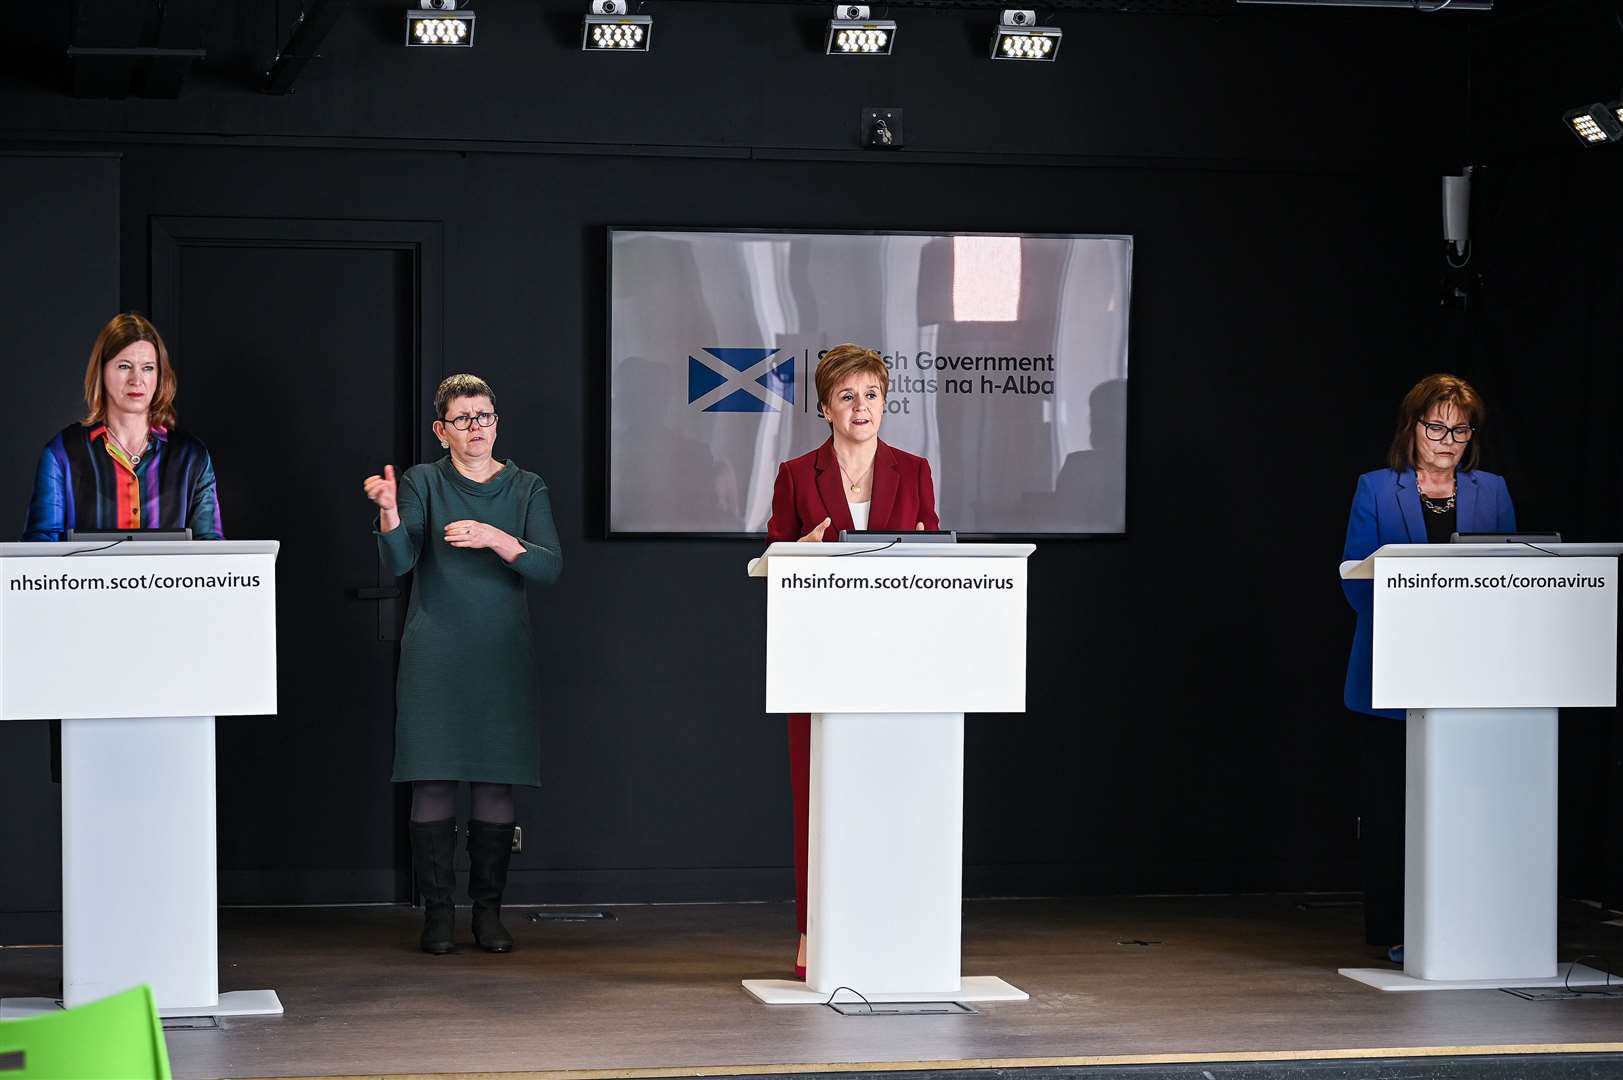 First Minister Nicola Sturgeon (centre) speaking at a coronavirus briefing at St Andrews House in Edinburgh with Scotland's former chief medical officer Dr Catherine Calderwood (left) and health secretary Jeane Freeman (right).